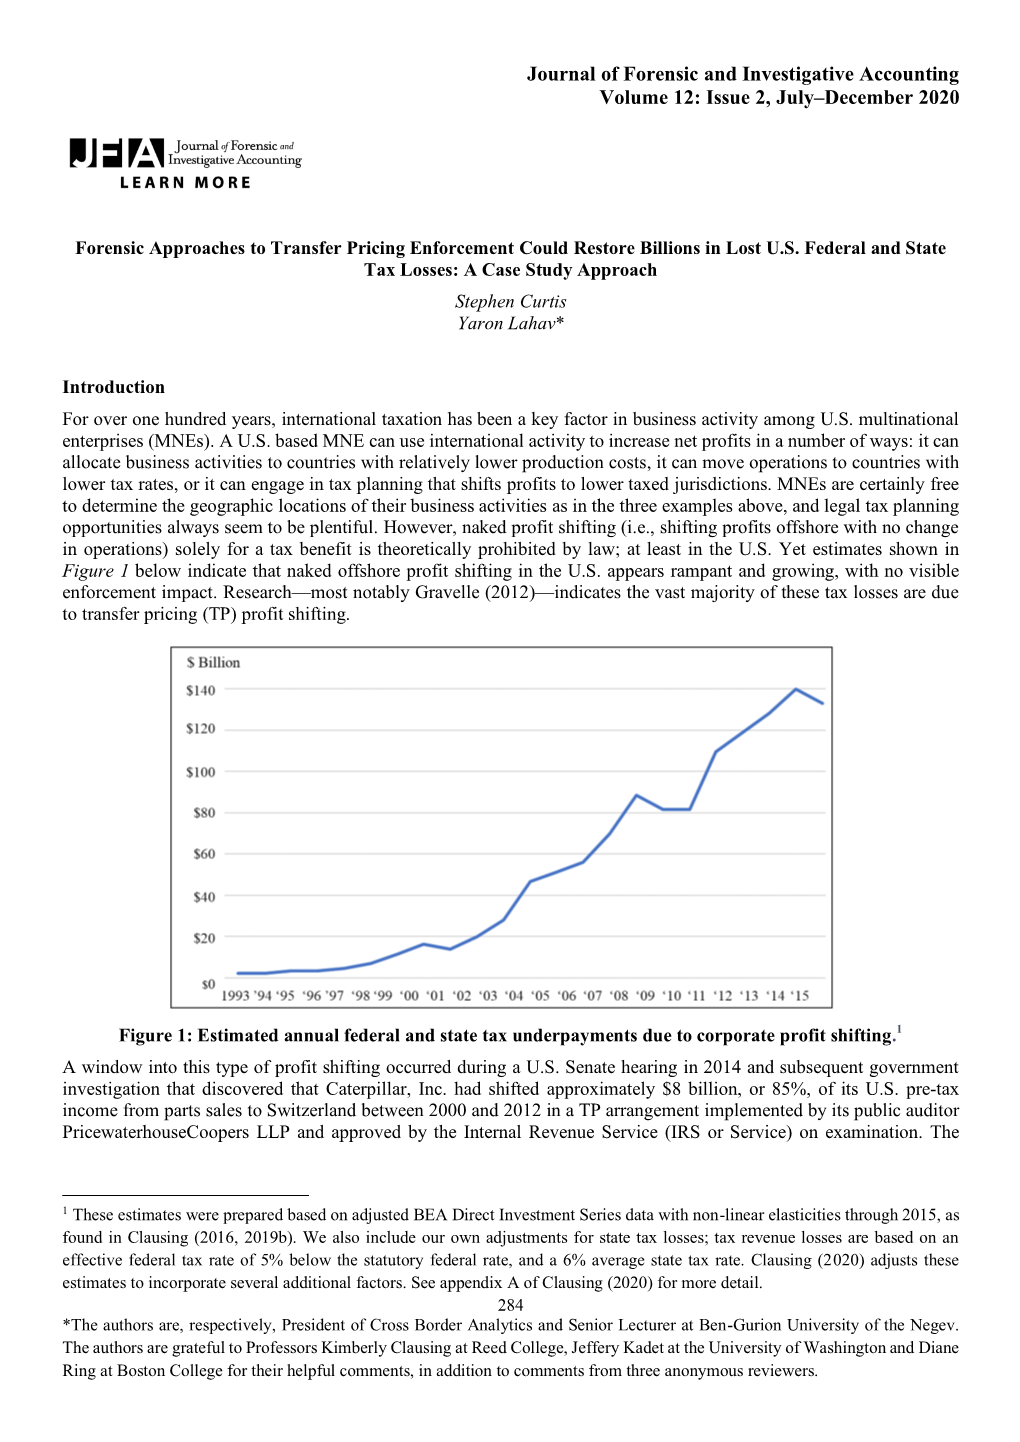 Journal of Forensic and Investigative Accounting Volume 12: Issue 2, July–December 2020